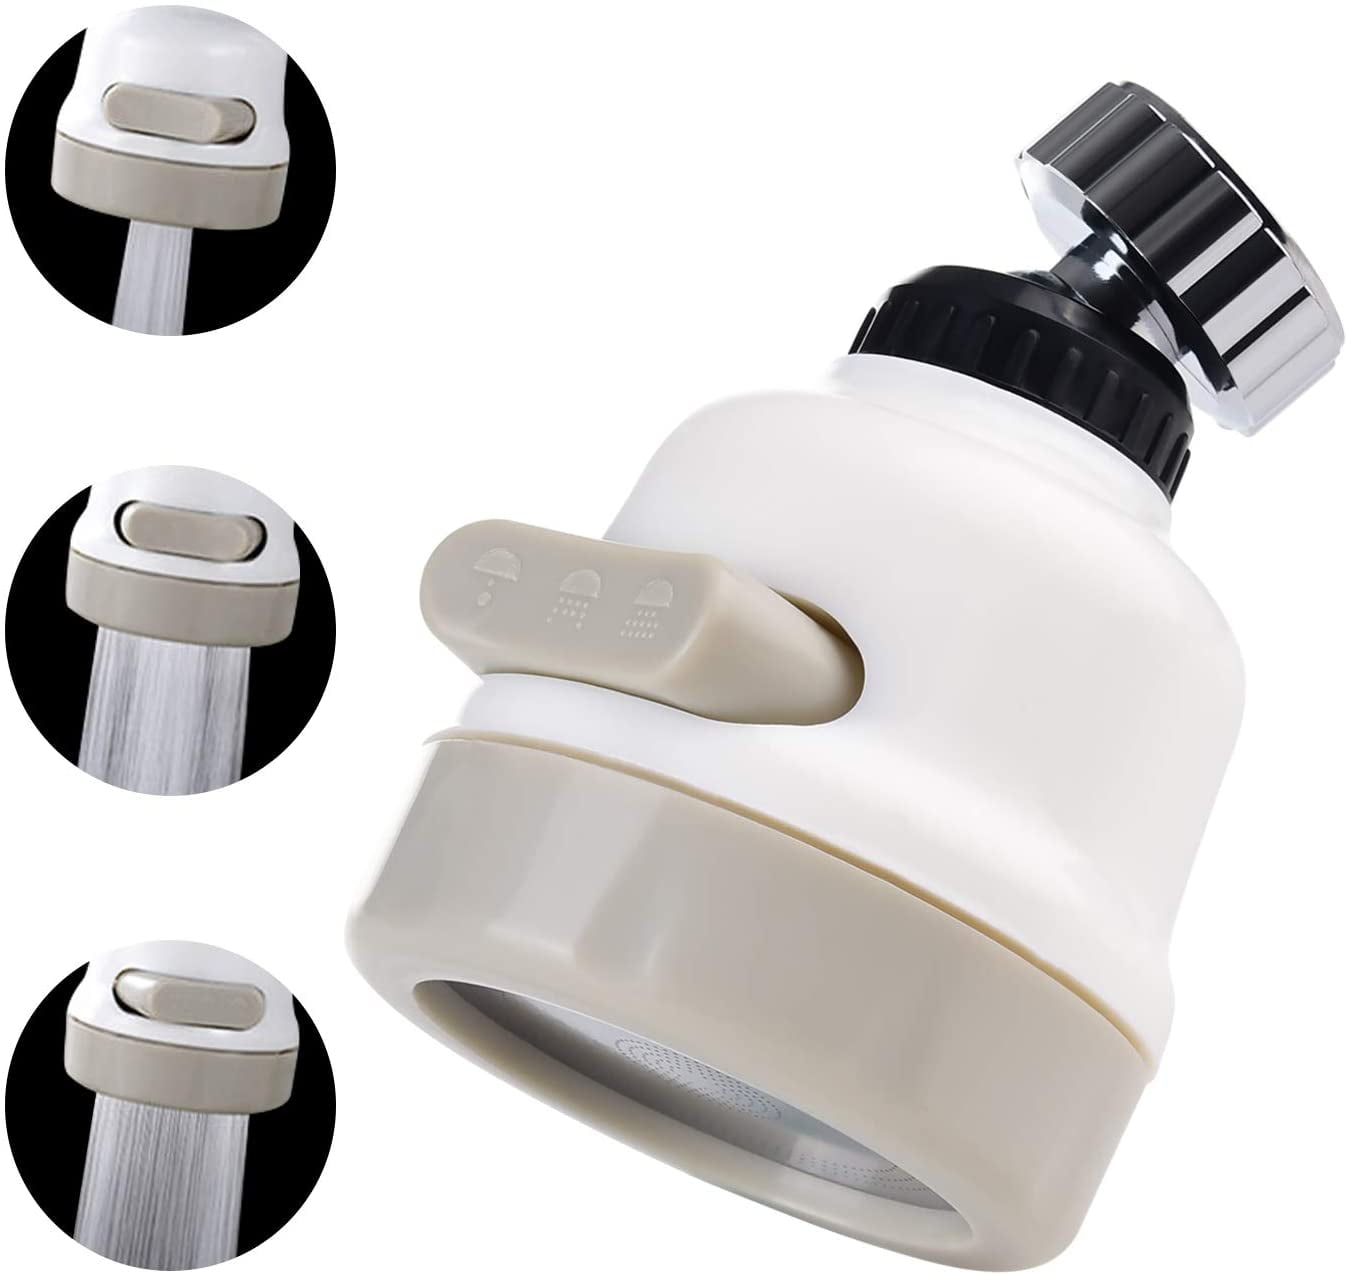 Details about   Kitchen Faucet Head Sink Aerator,360° Rotatable Water Save Faucet Swivel Head US